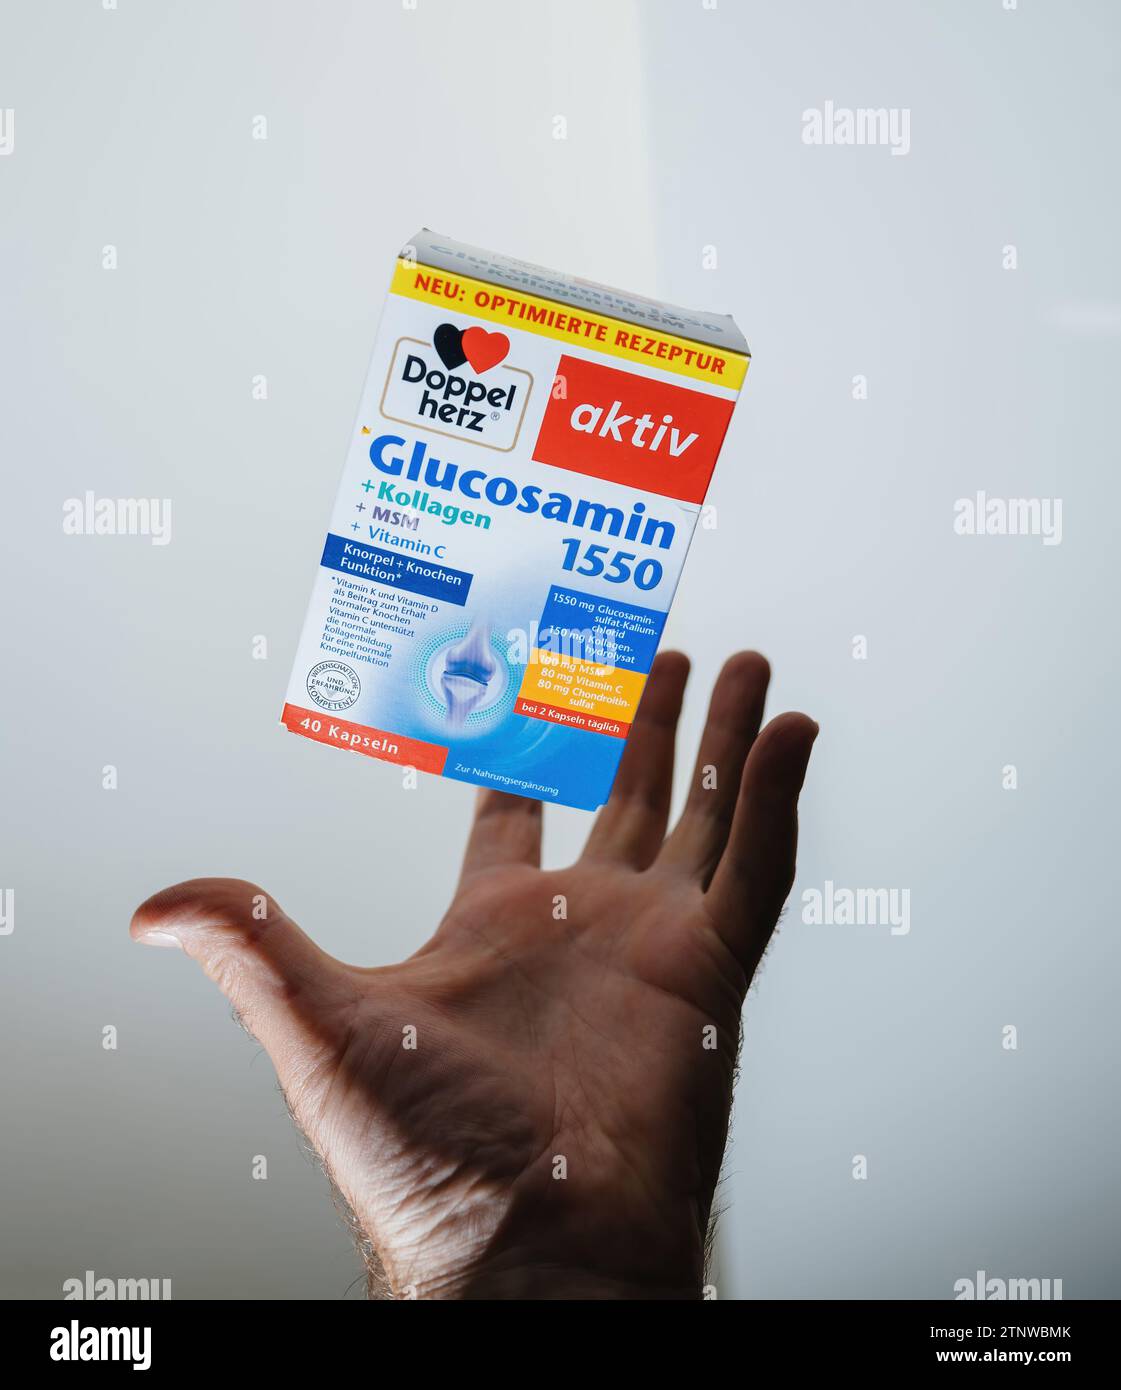 Frankfurt, Germany - Jun 12, 2023: Male hand catching flying Glucosamin 1550 by Doppel Herz, a food supplement, showcasing health and wellness Stock Photo